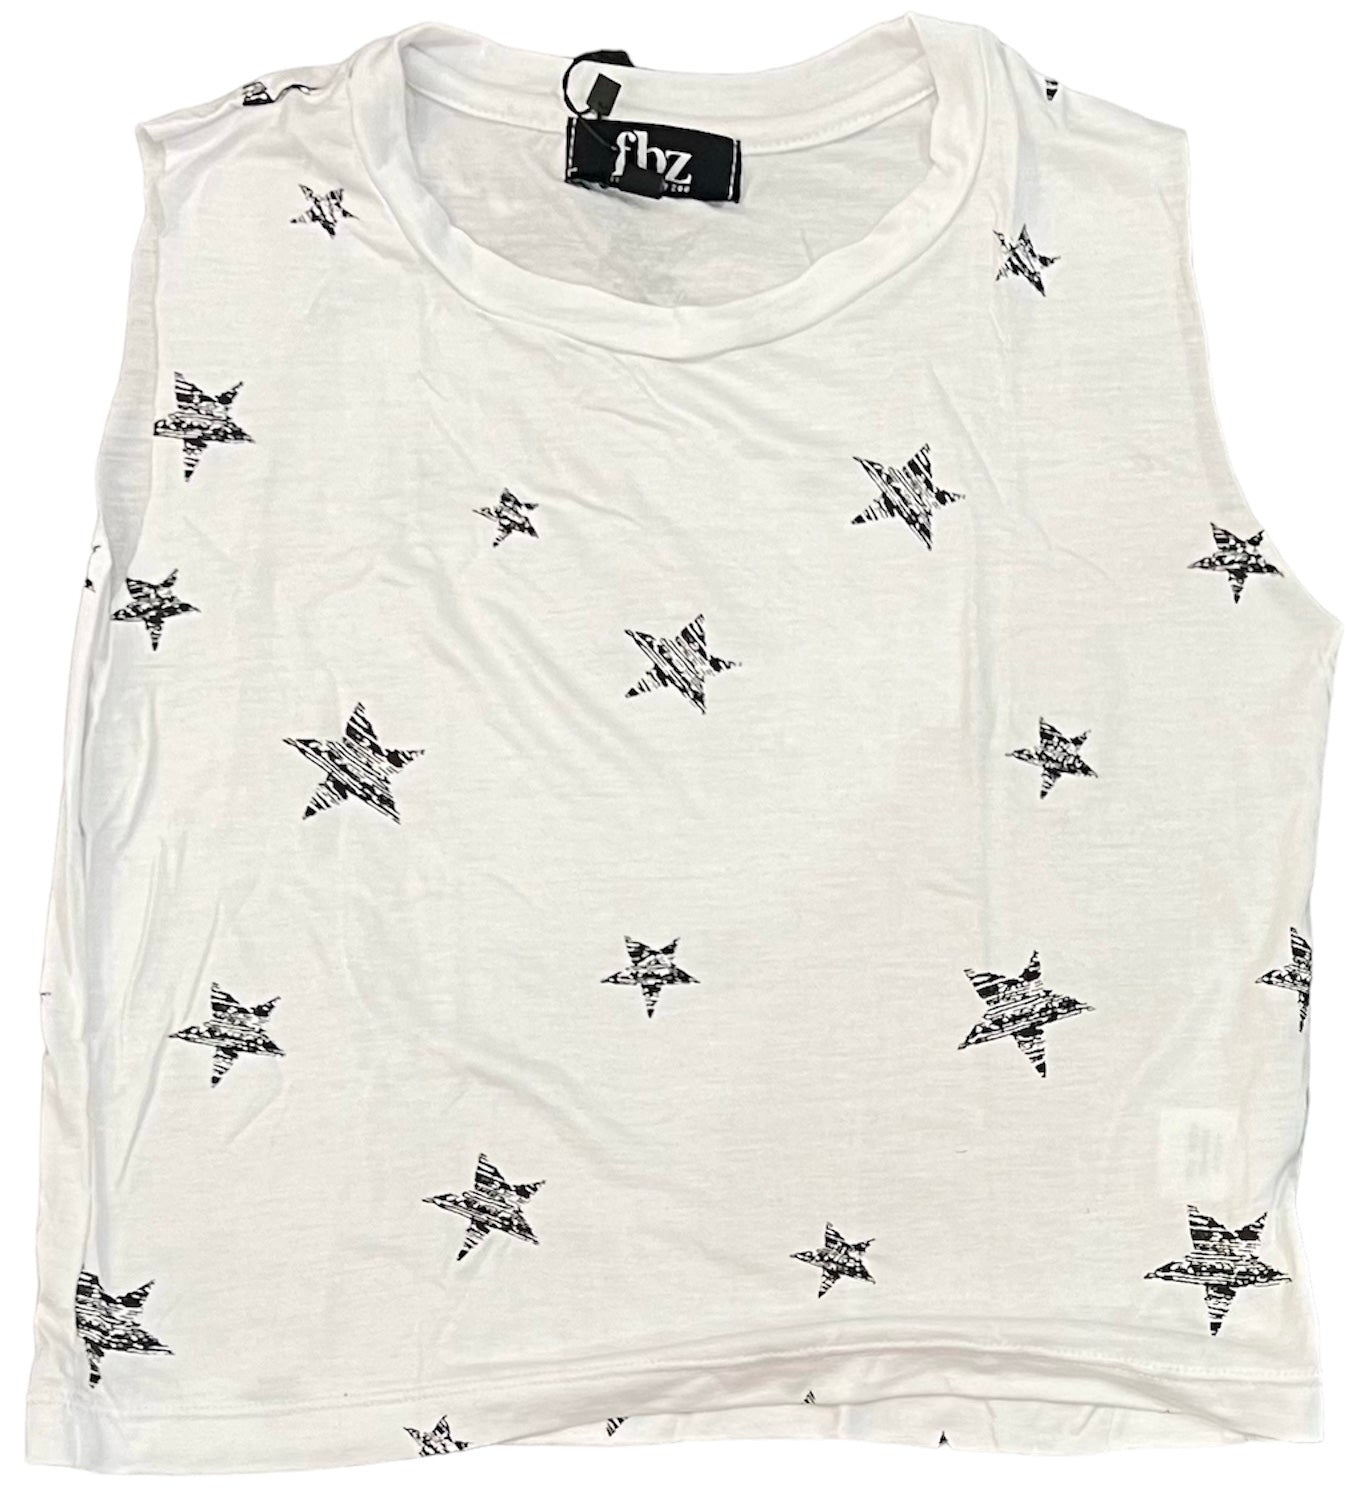 Flowers by Zoe - White Tank with Distressed Stars